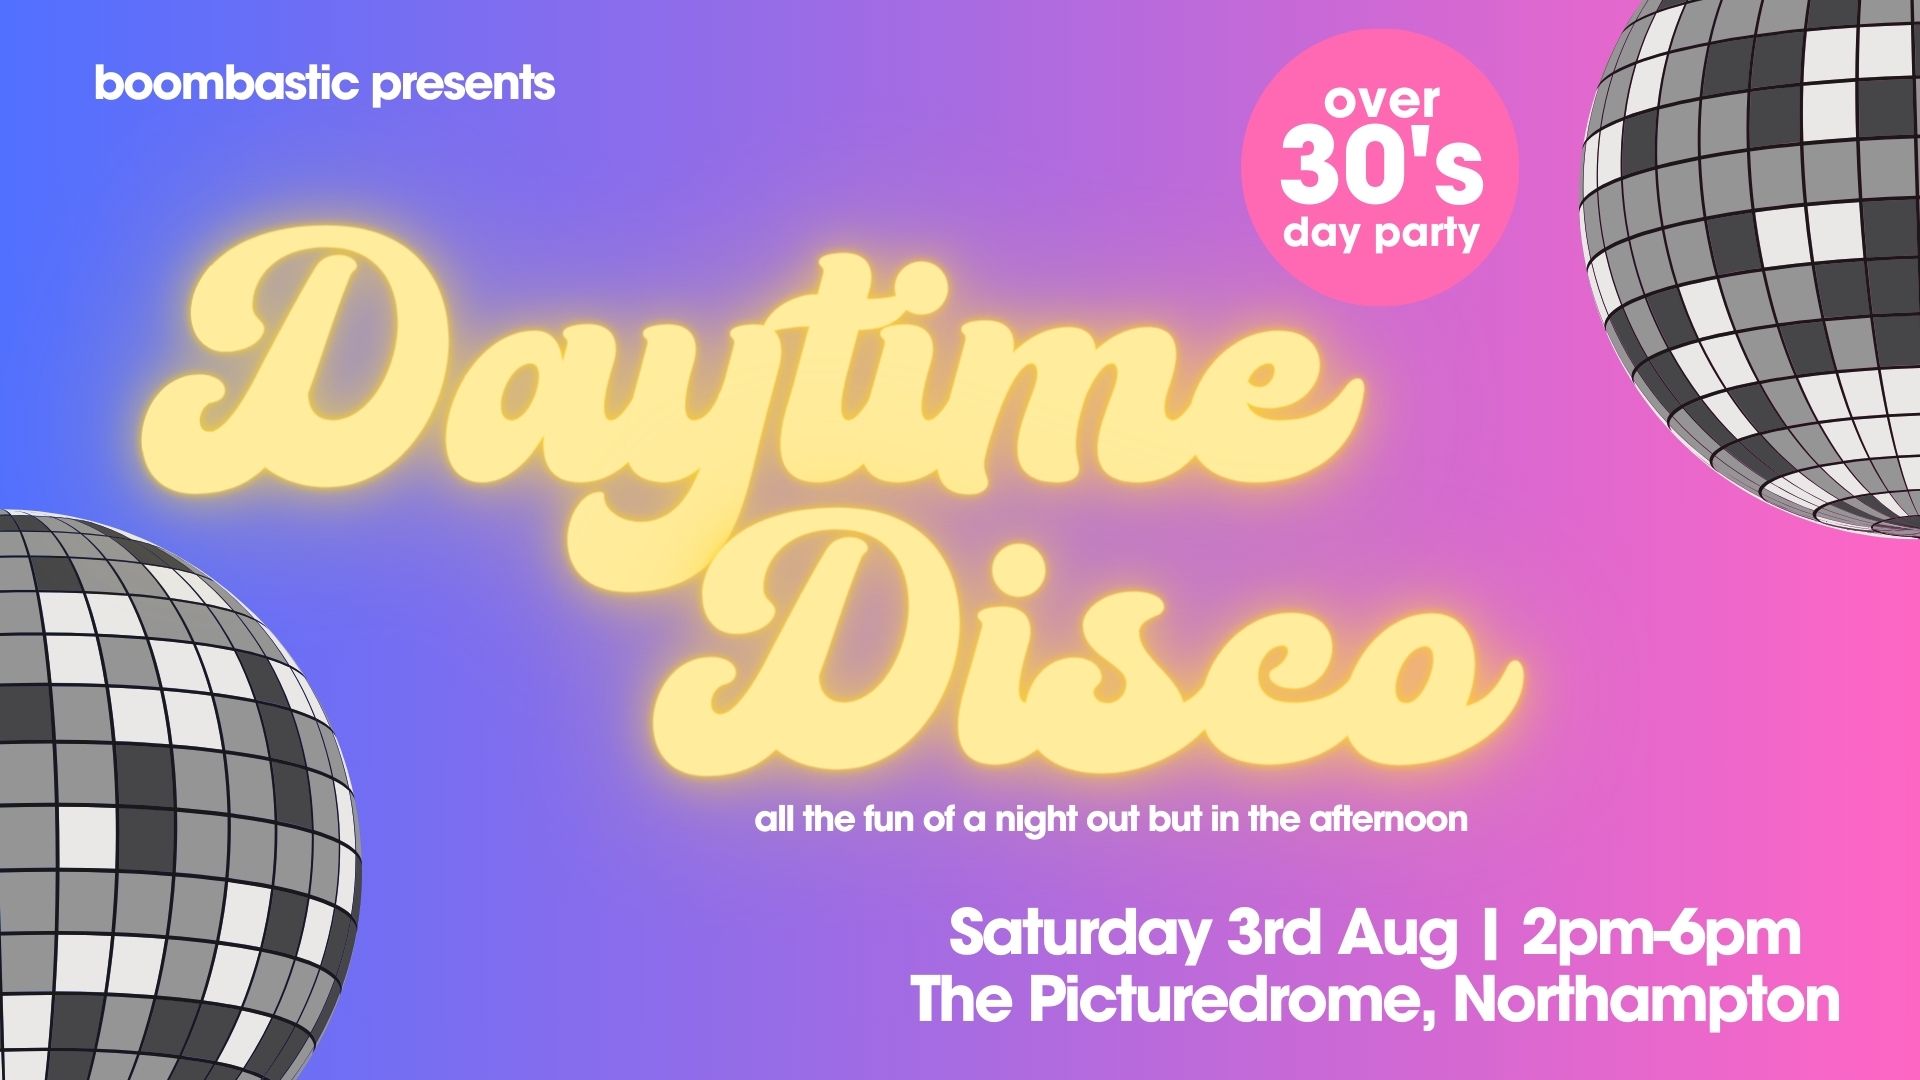 DAYTIME DISCO Northampton - For the Over 30s Crowd